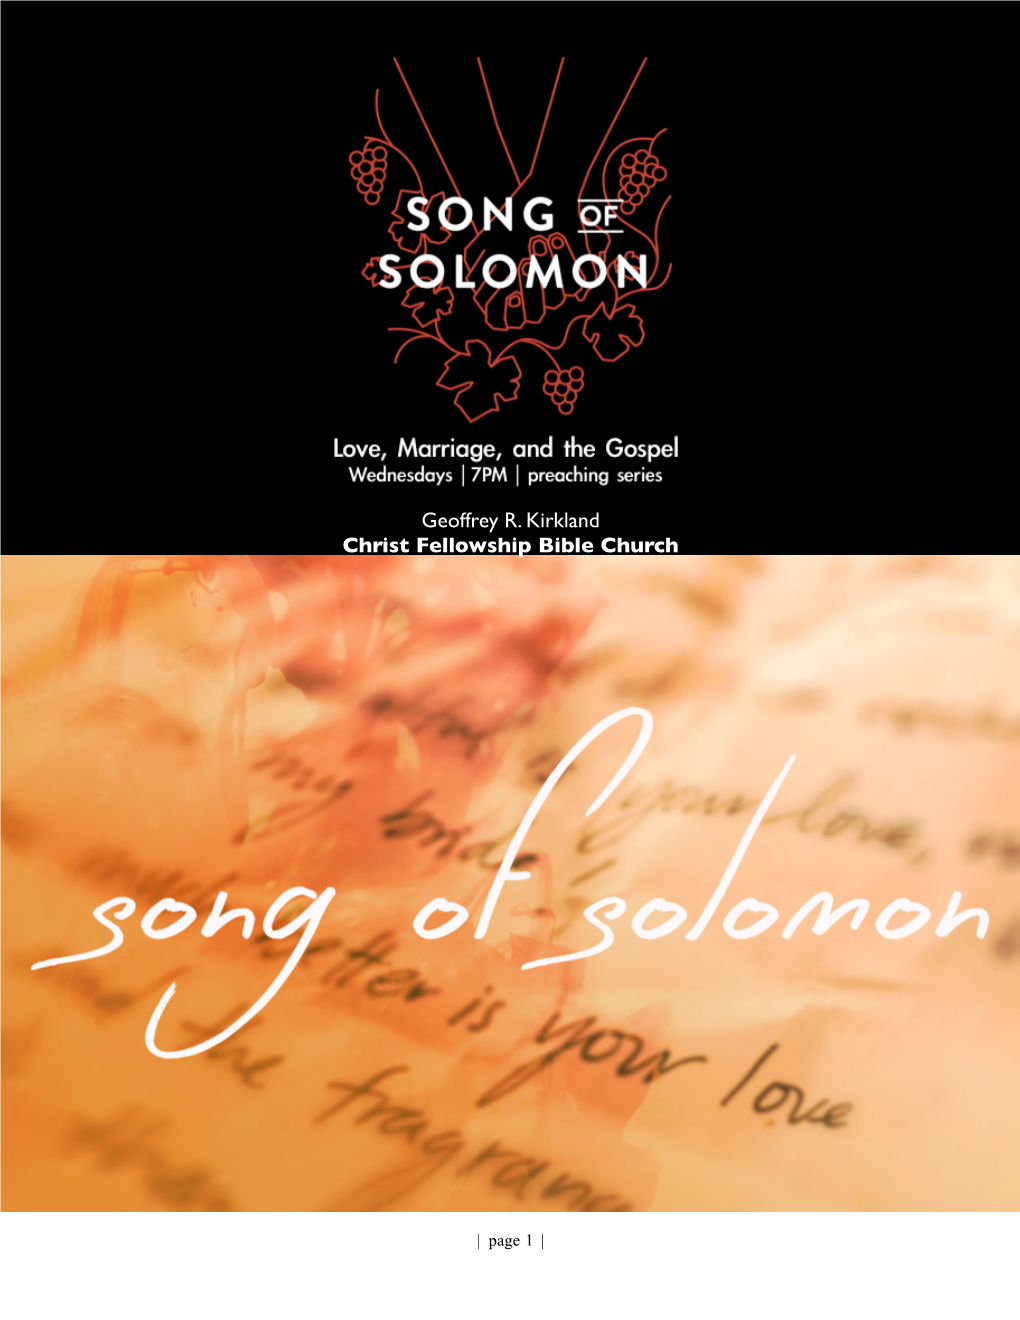 SONG of SOLOMON Or, More Literally Titled: “Song of Songs” INTRO NOTES